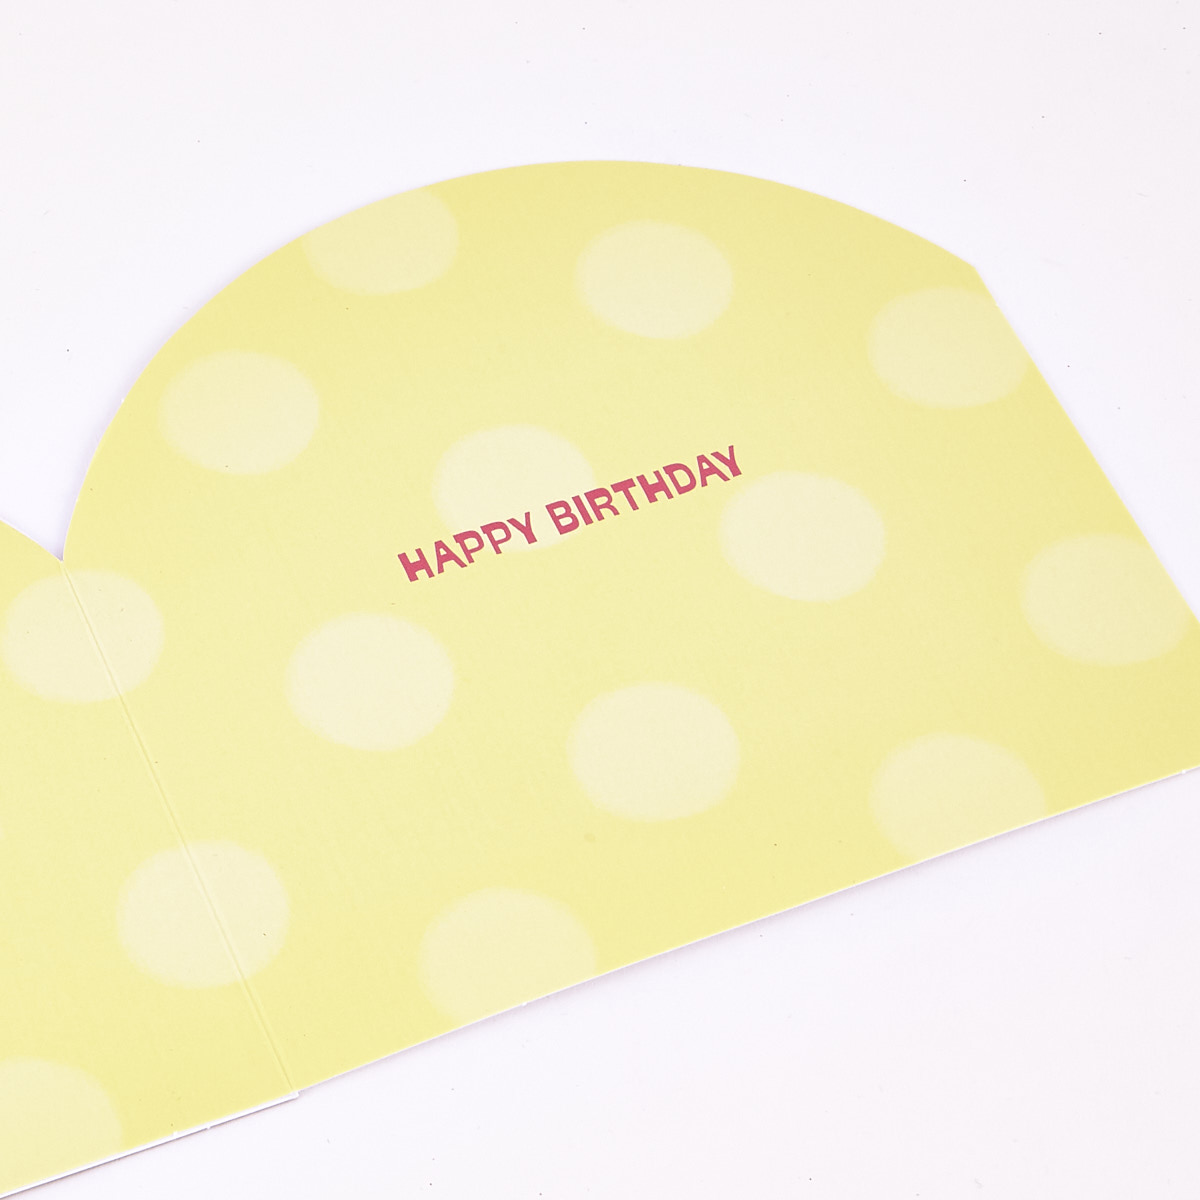 Boutique Collection Birthday Card - Granny Bear Pop-Up 